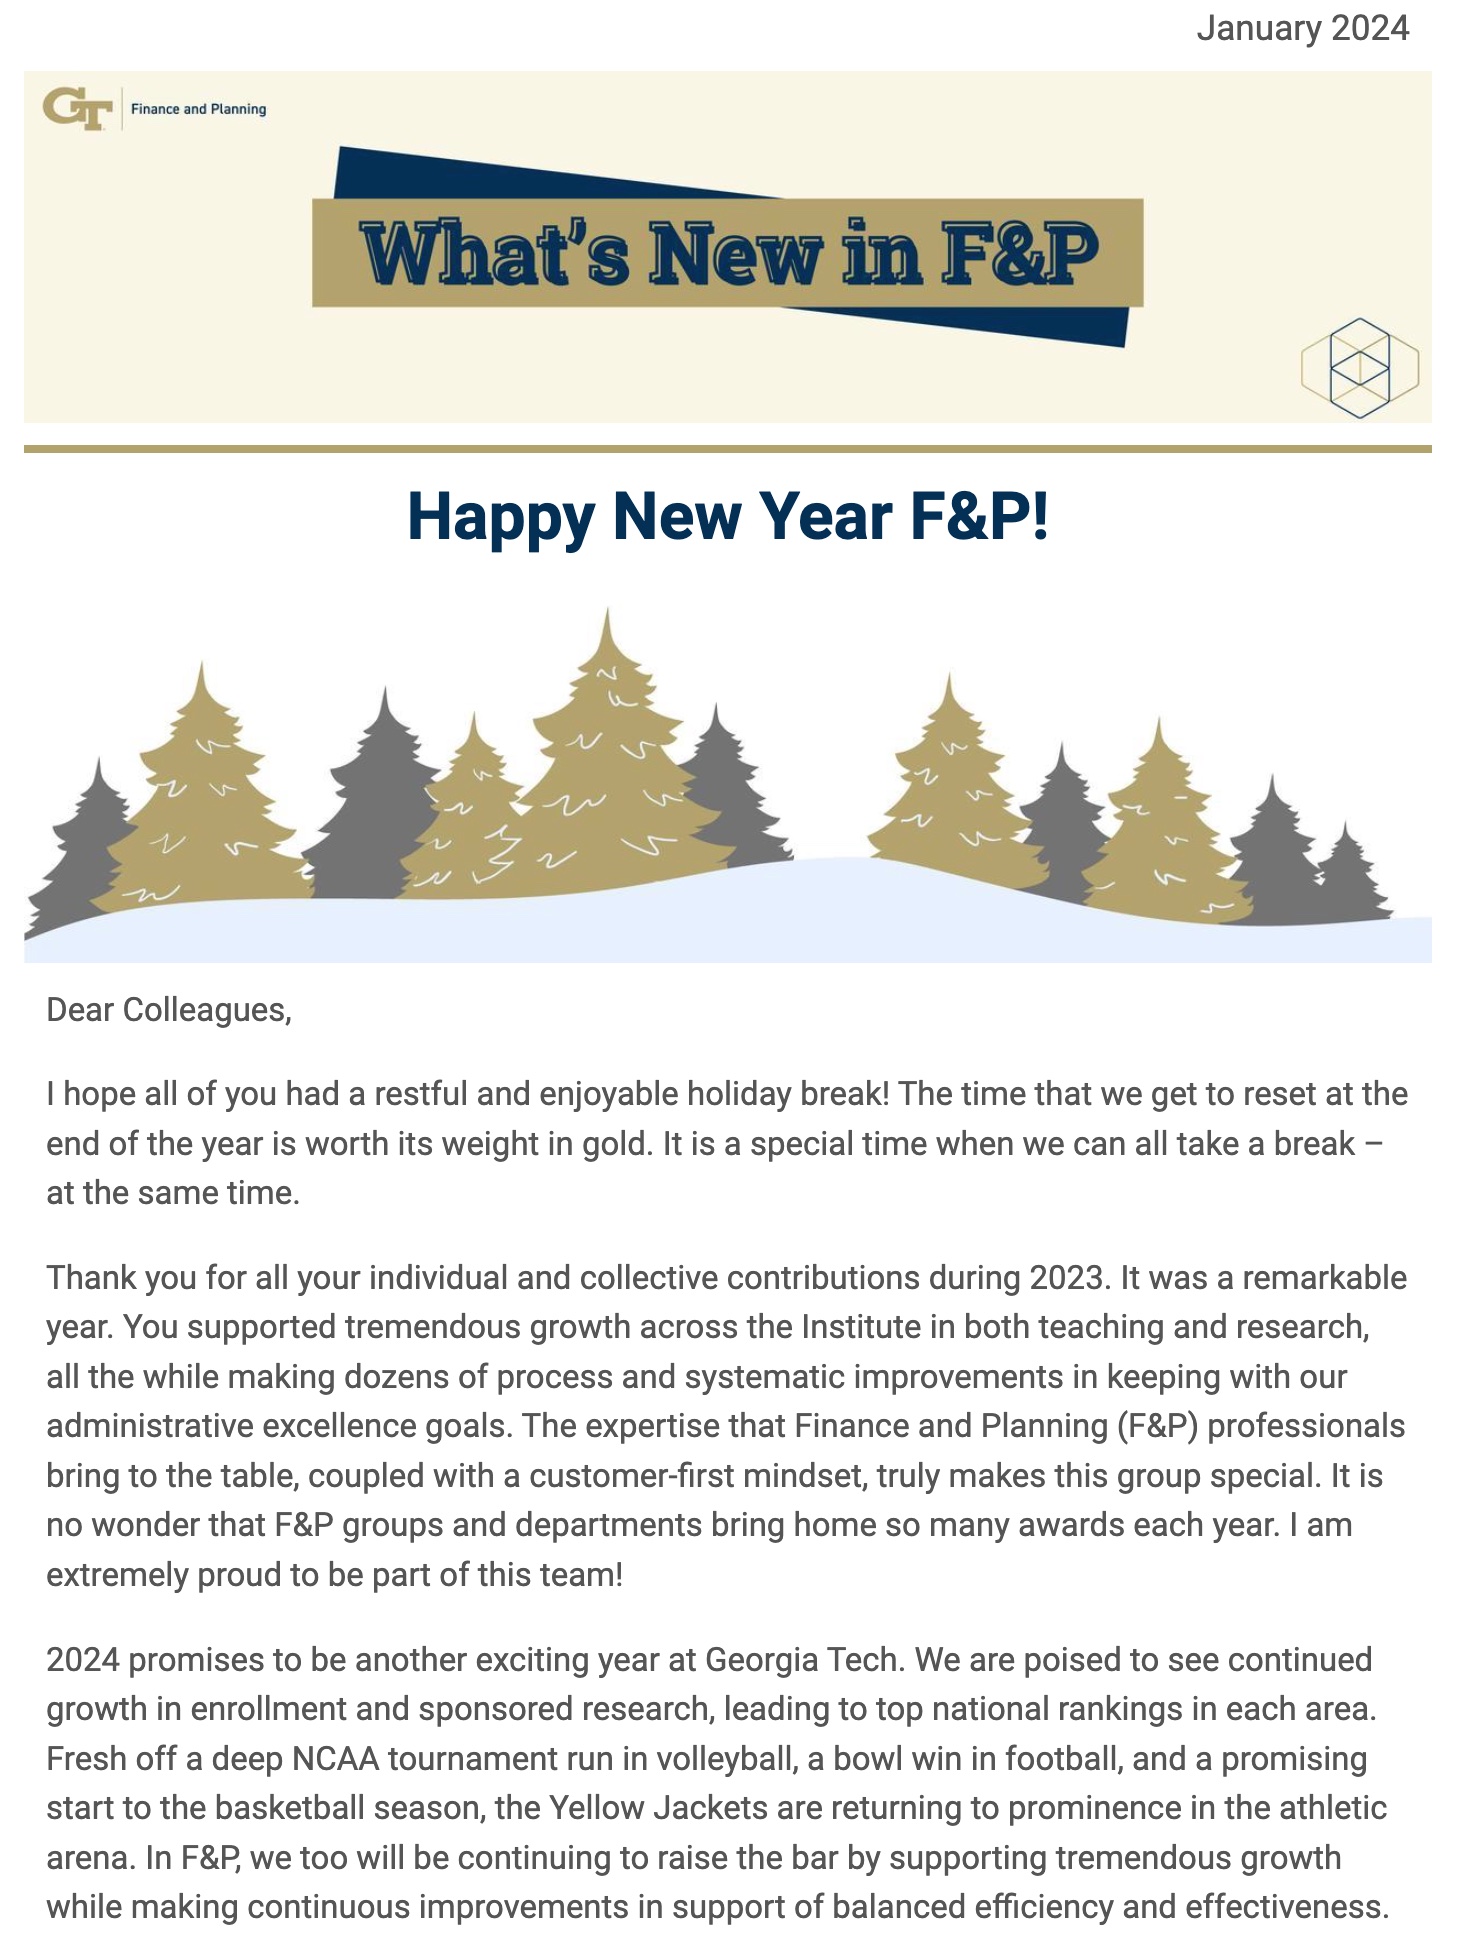 Jan. 2024 What's New in F&P